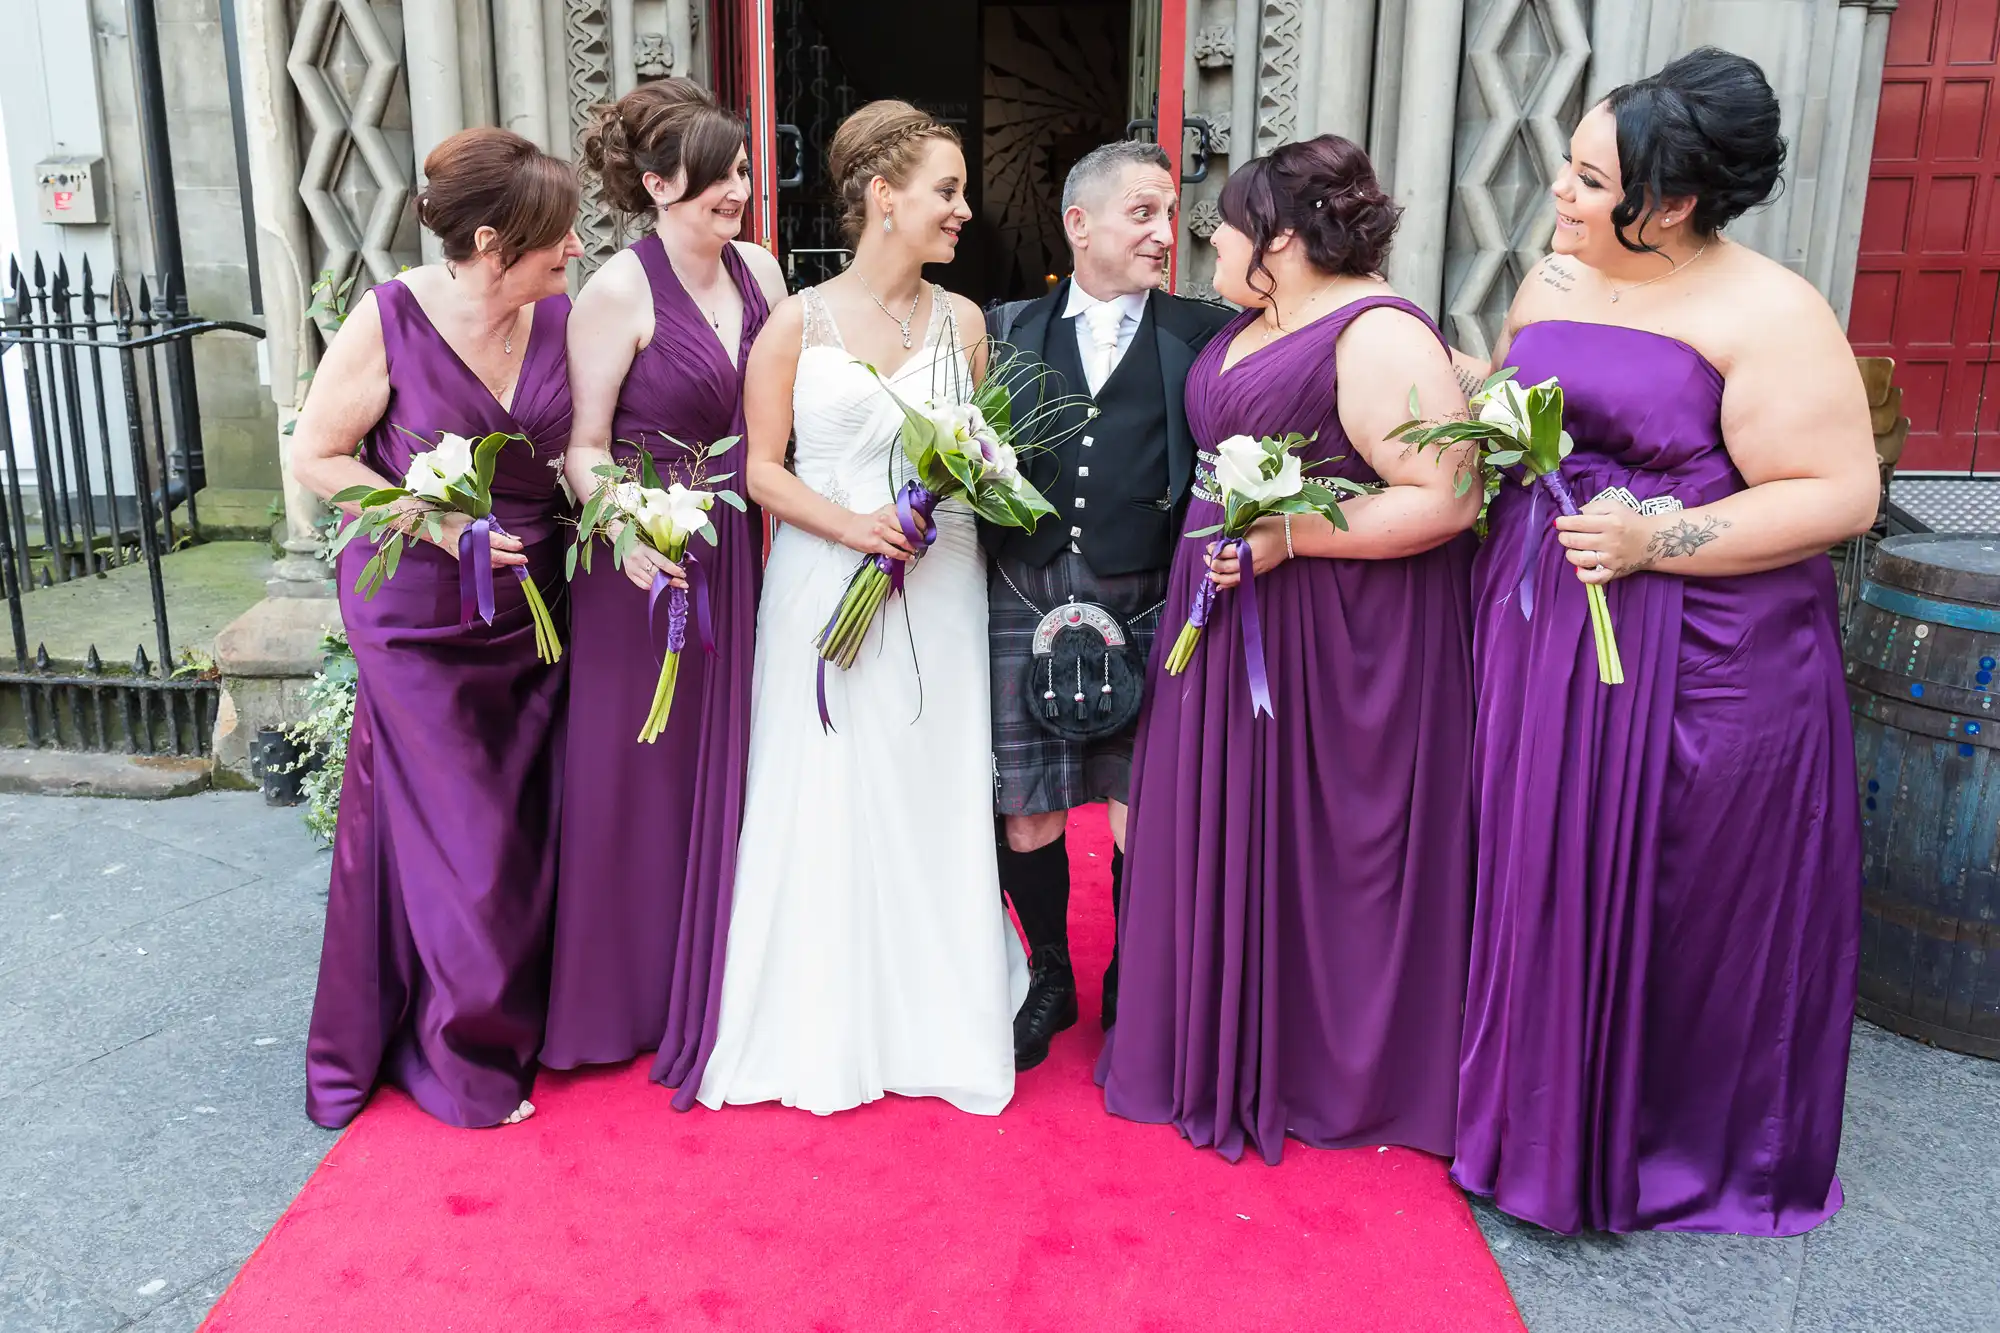 A bride and groom smile and chat with four bridesmaids dressed in purple on a red carpet outside a venue.